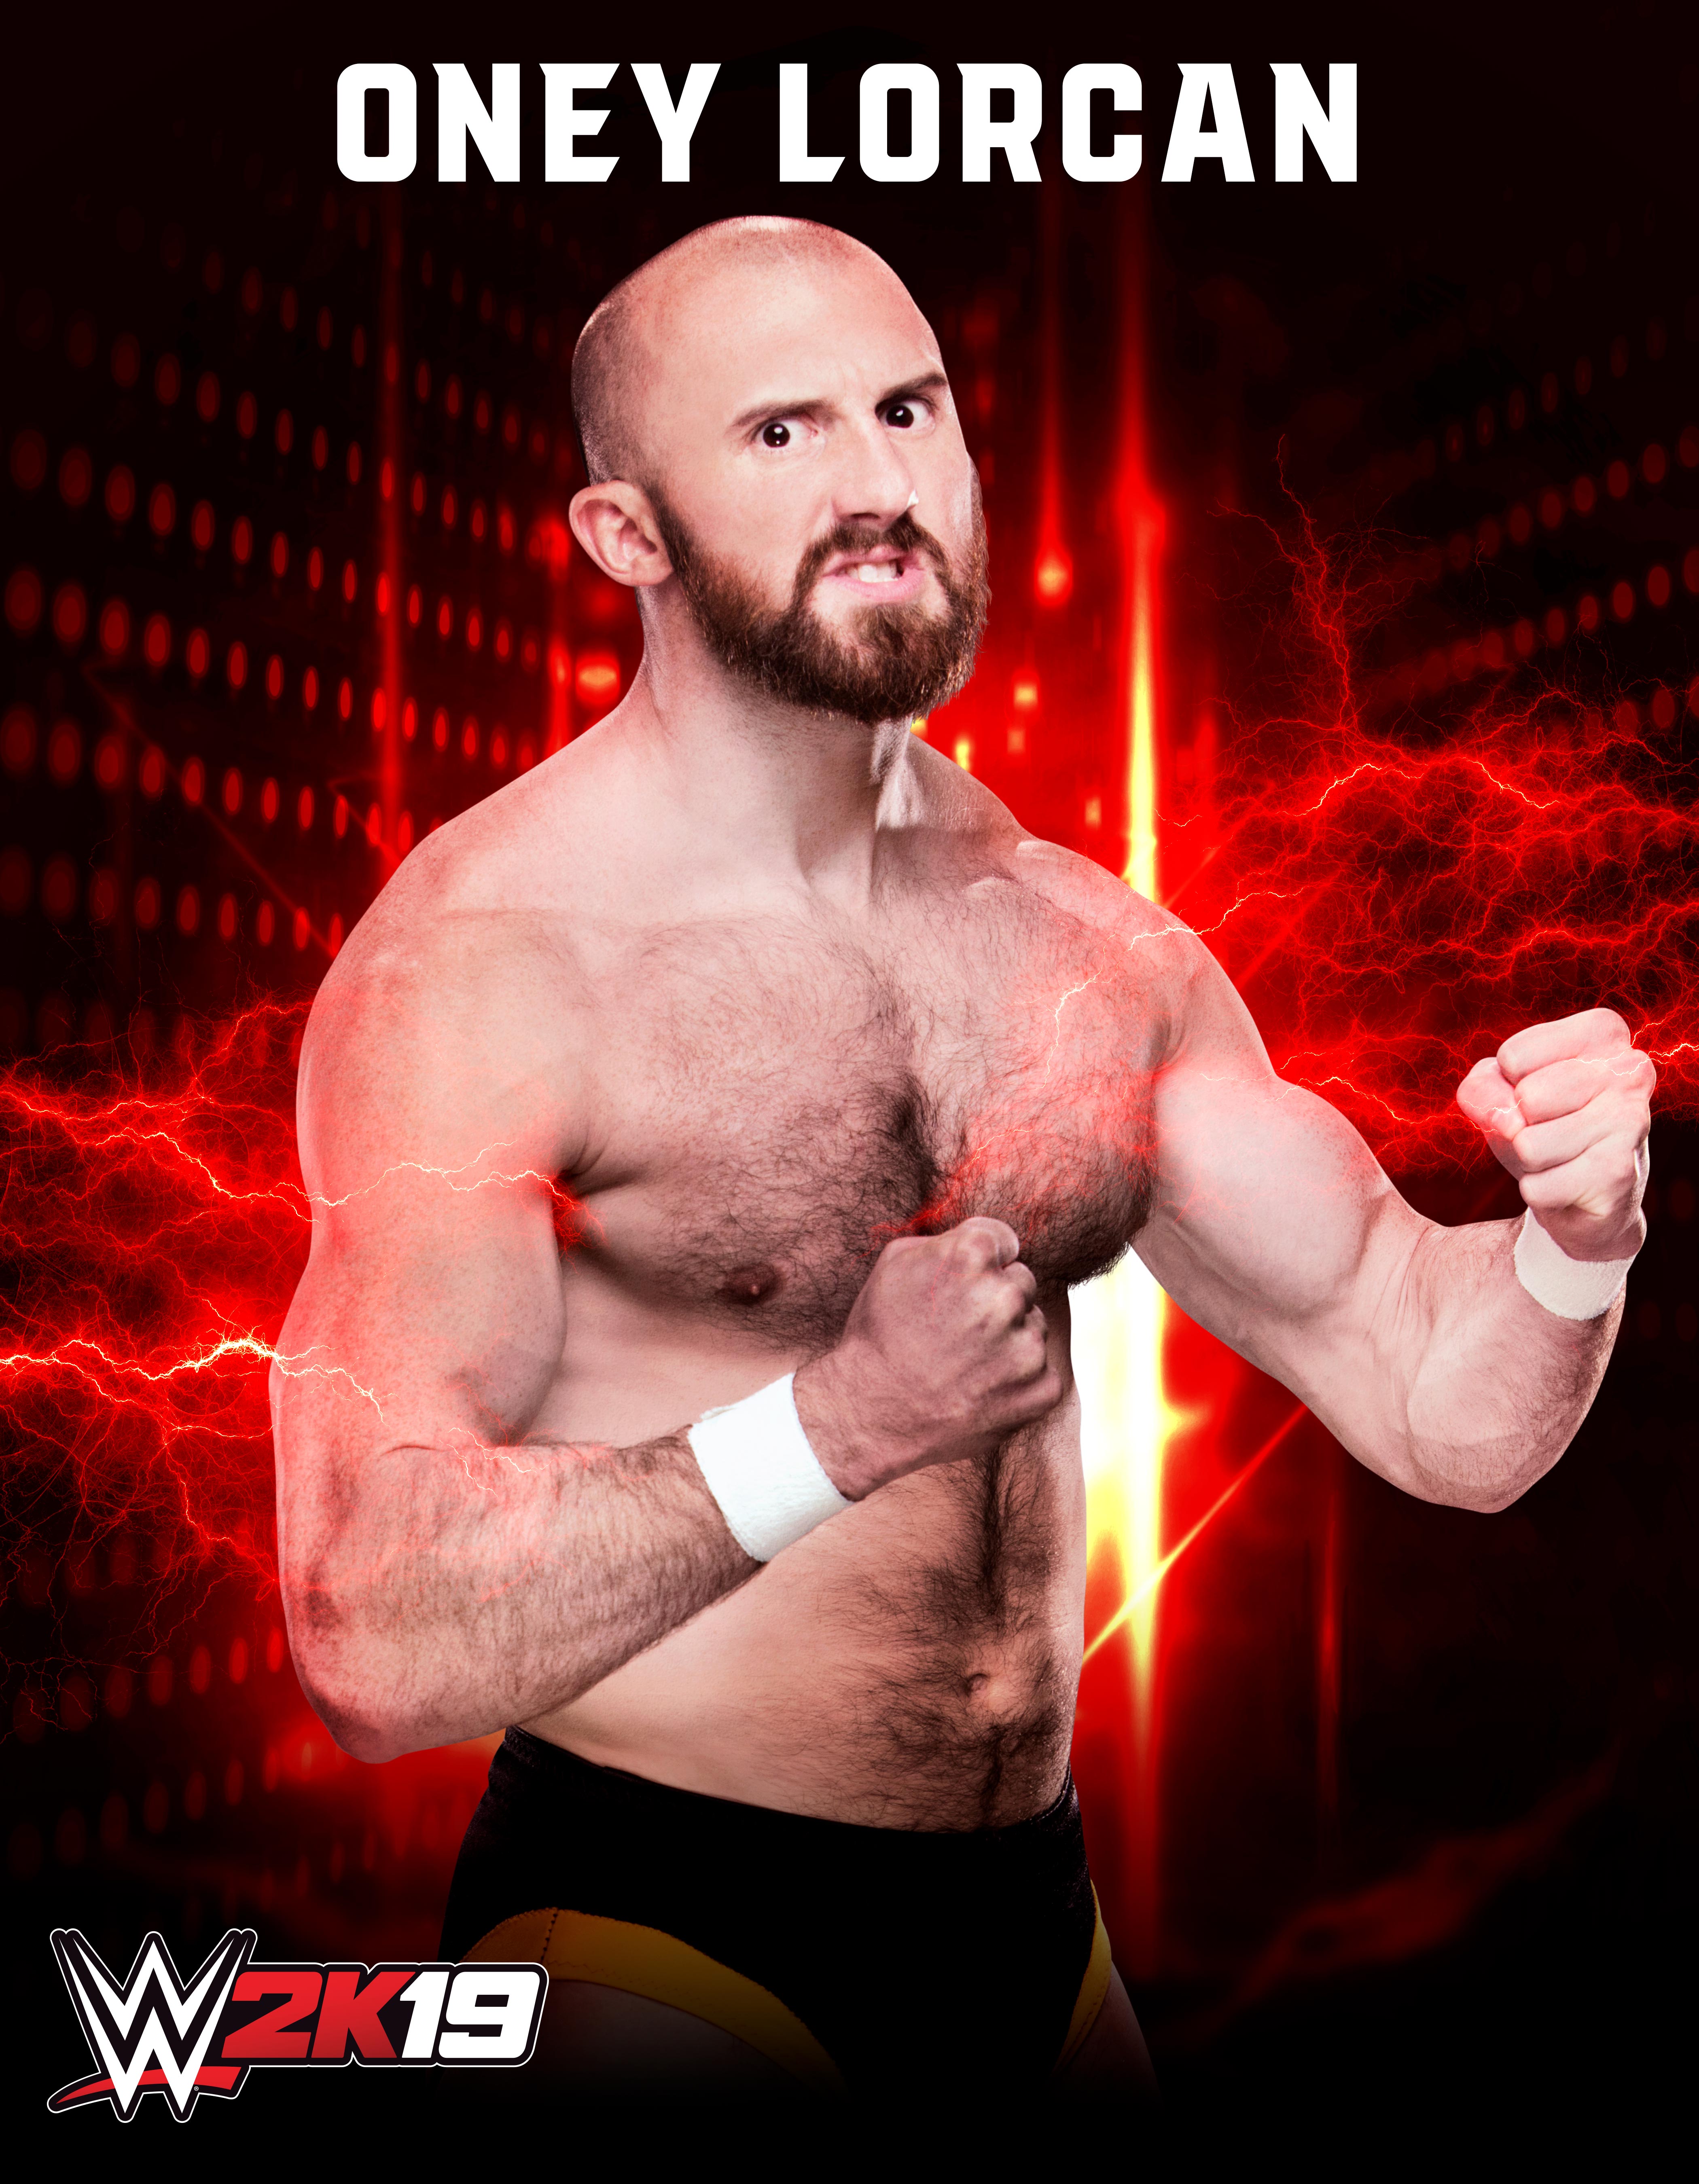 Wwe2k19 Roster Oney Lorcan